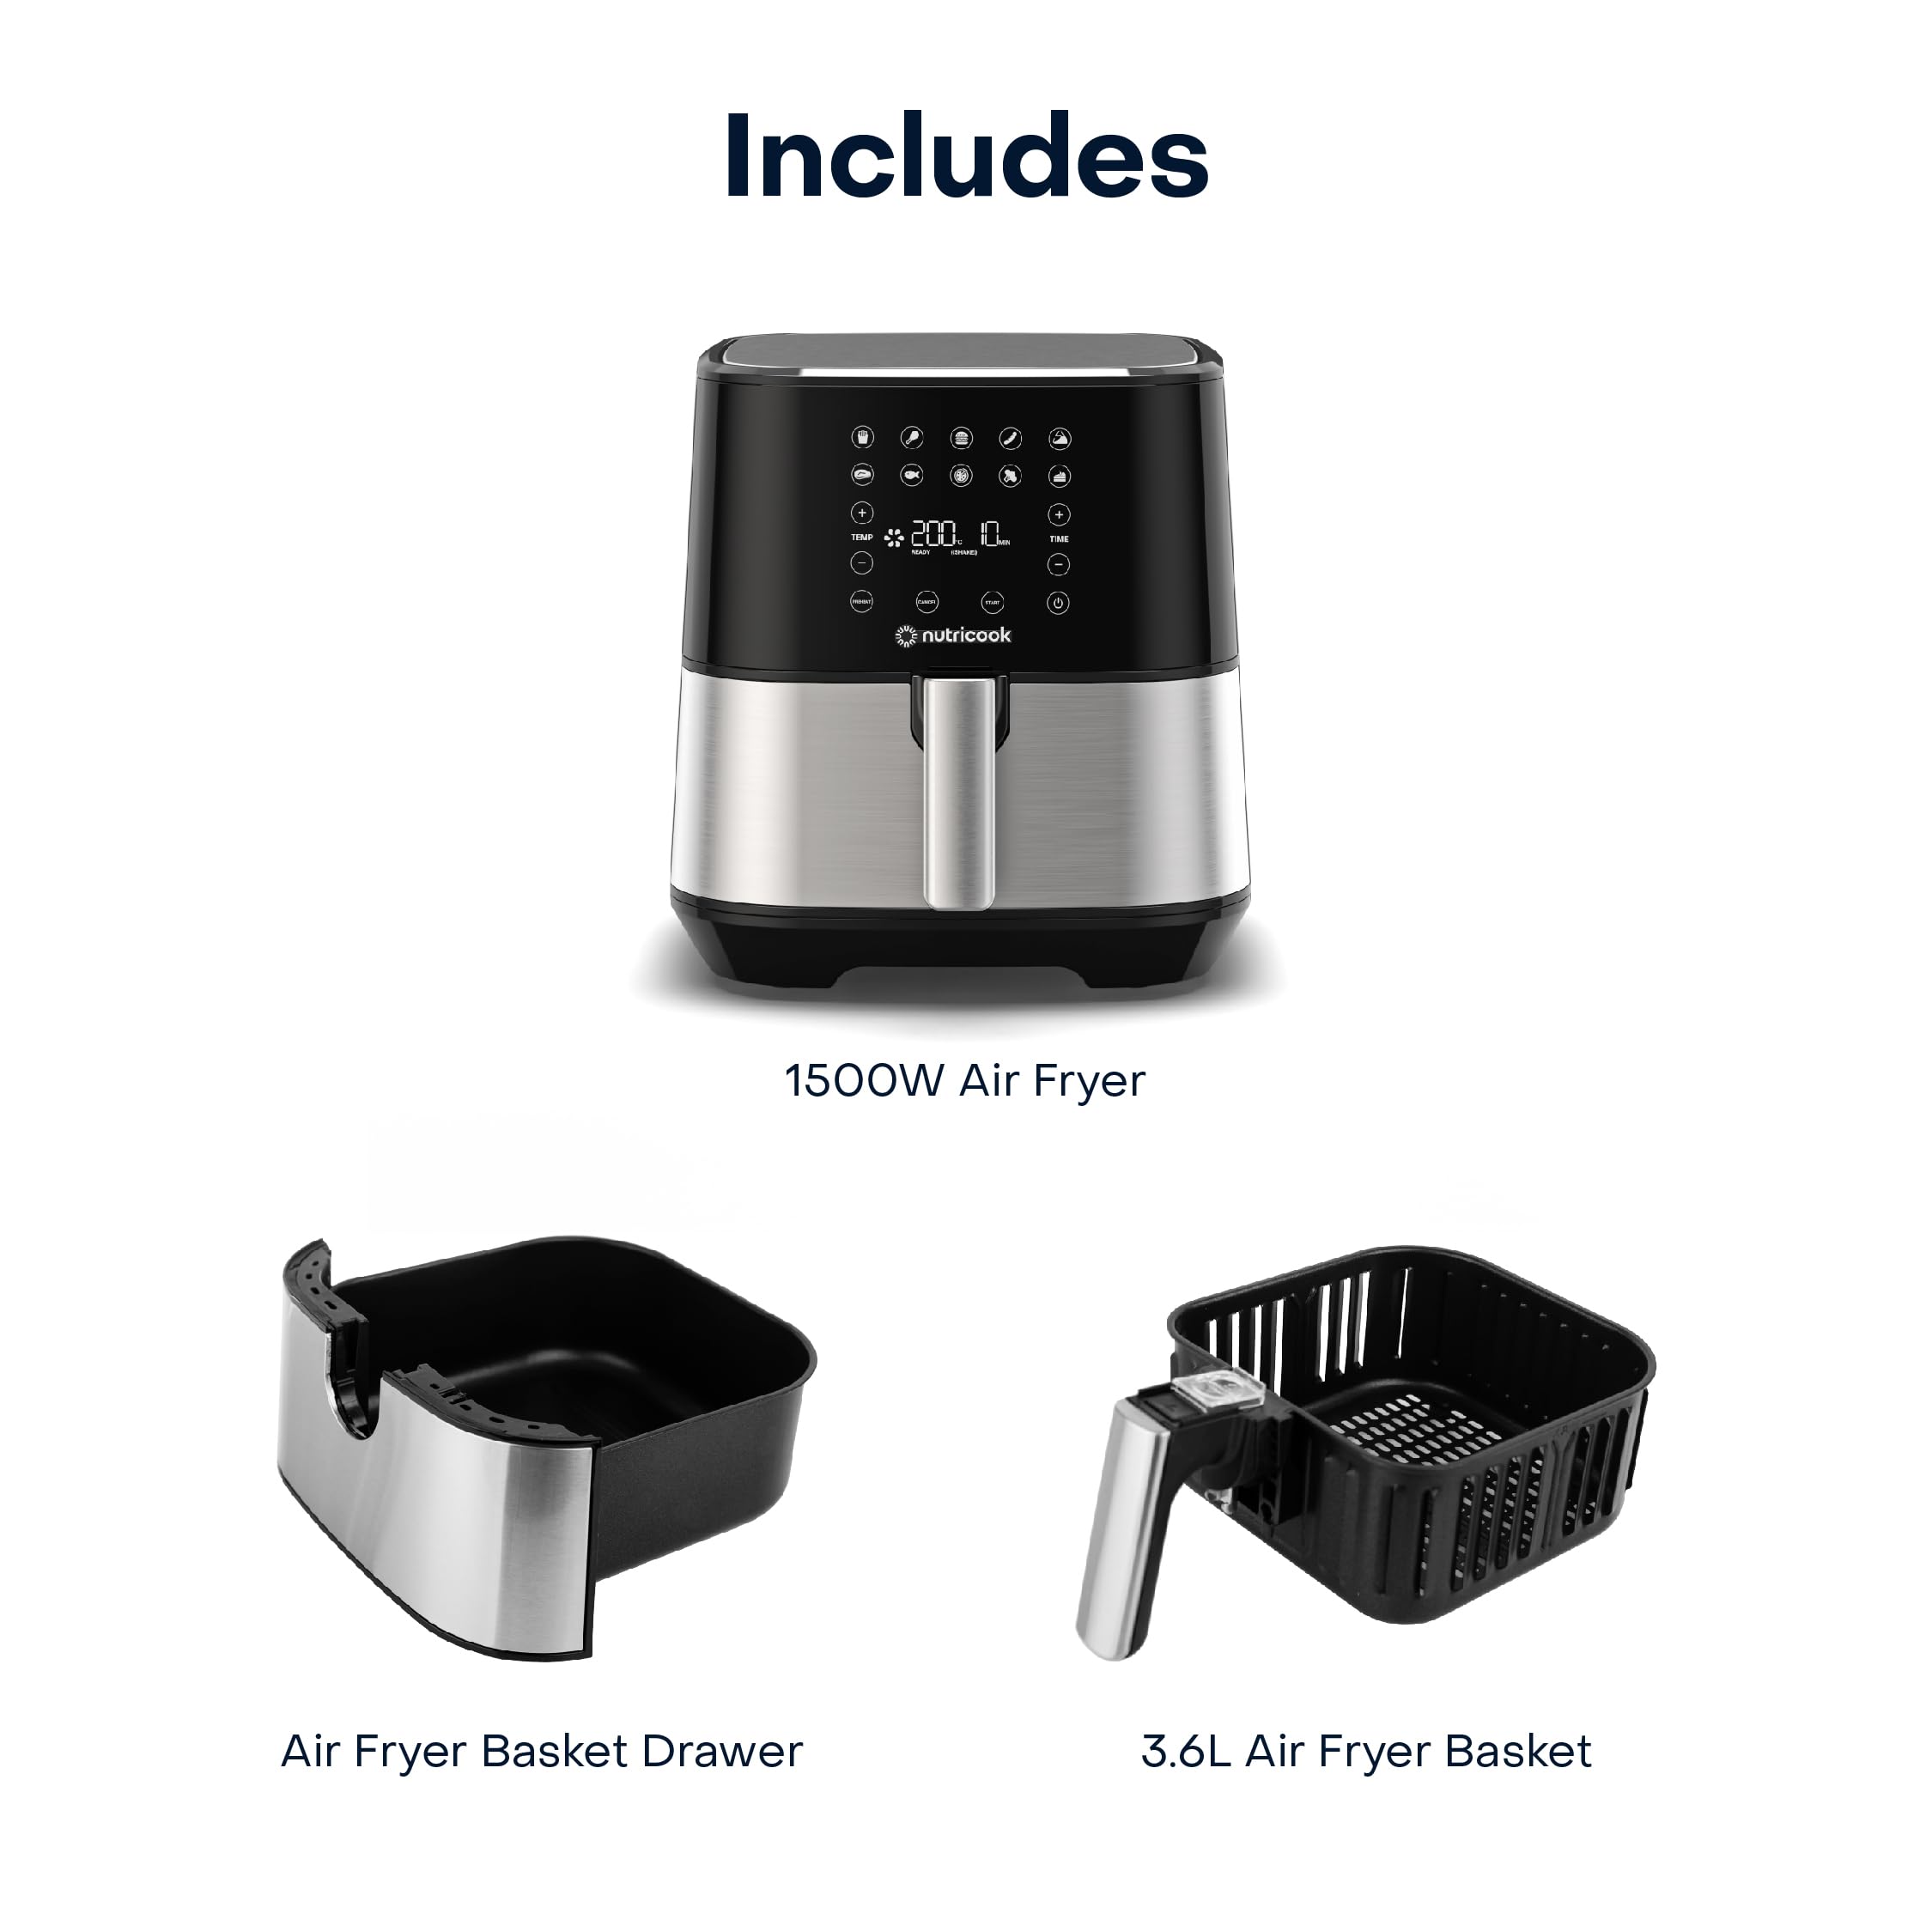 Nutricook Air Fryer 2,3.6 Liters, 1500 Watts, Digital 10 Pre-set Programs With Built-In Preheat Function, Stainless Steel/Black, 1 Years Warranty + CRED Quick Pull Chopper 650 ml, Amazon exclusive